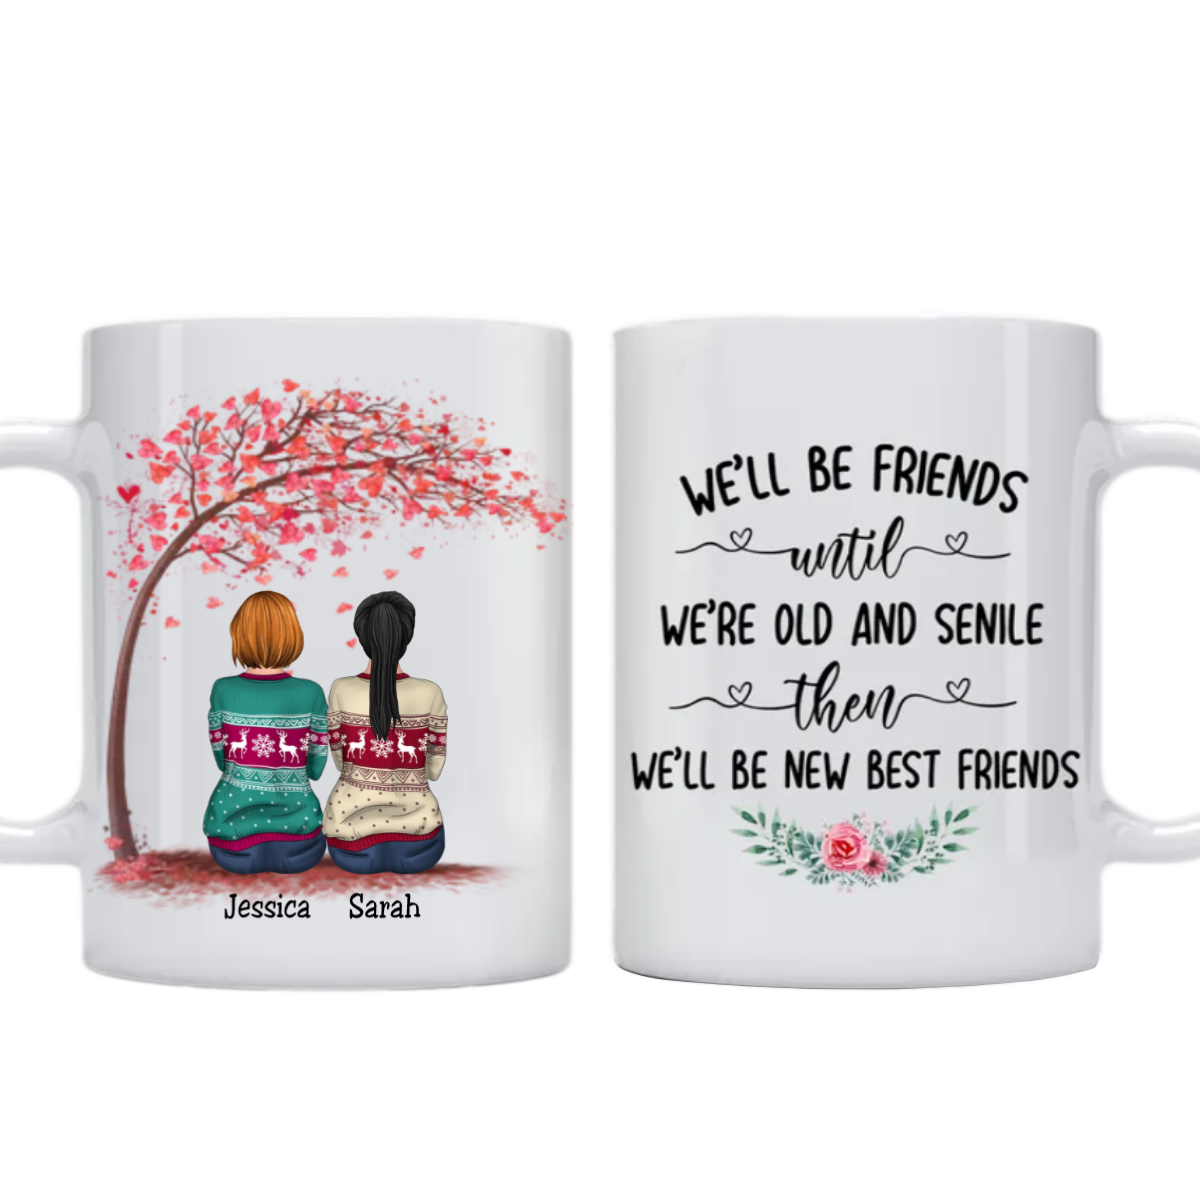 We'll Be Friends Until We're Old - Personalized Mason Jar Cup With